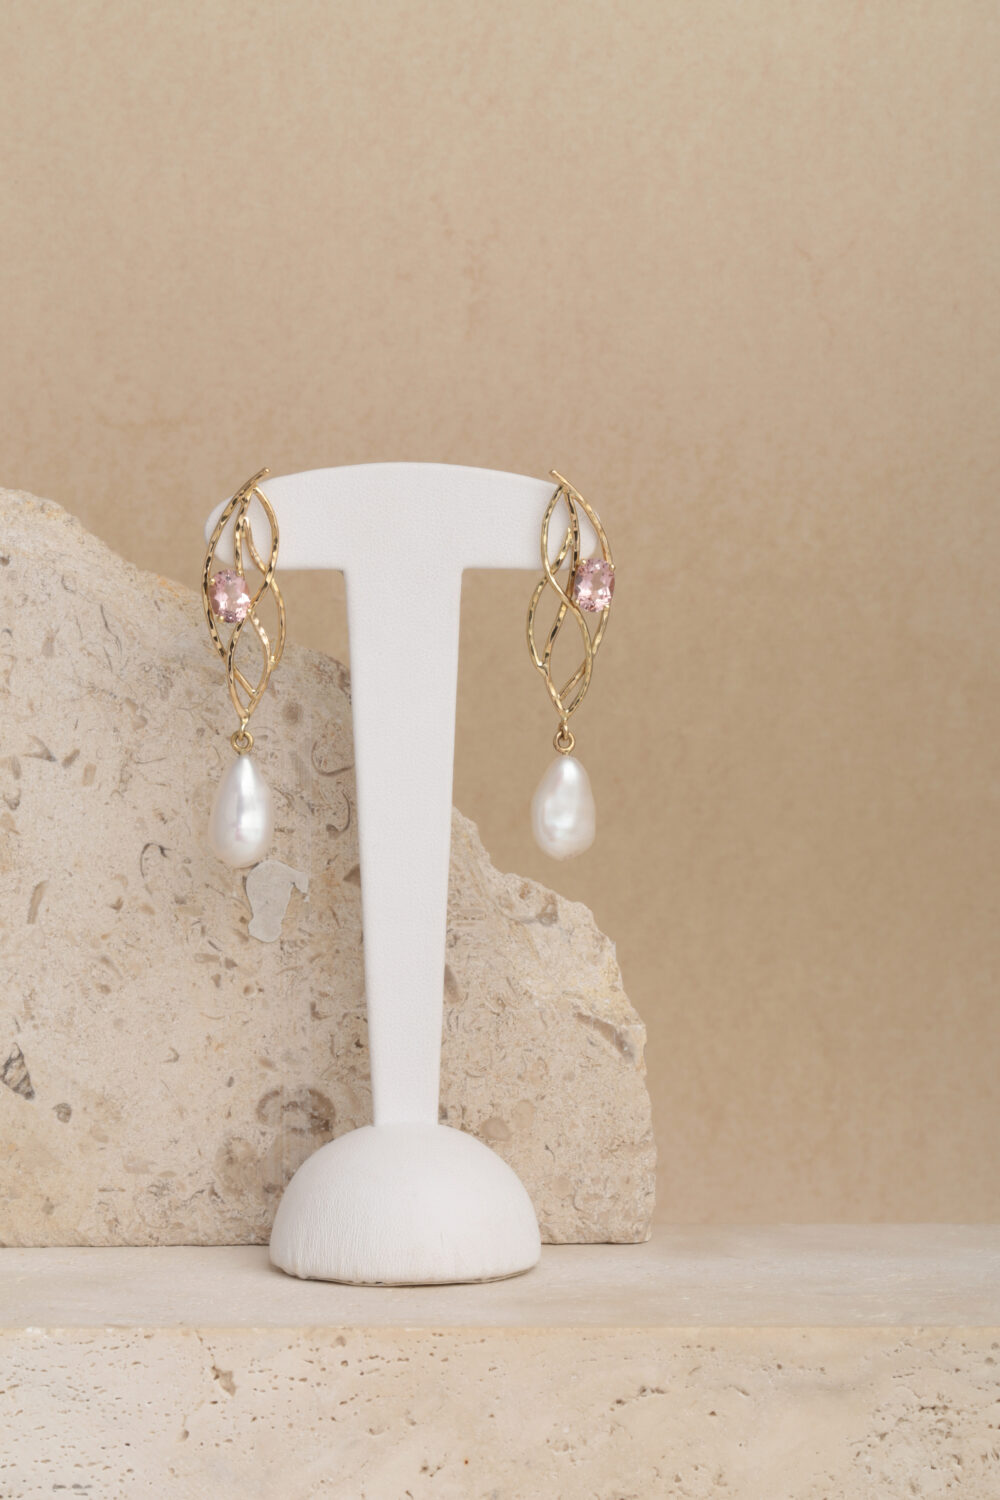 Morganite and Pearl earrings crafted from 18-karat yellow gold set with two oval cut morganite gemstones and two baroque drop-shaped pearls.